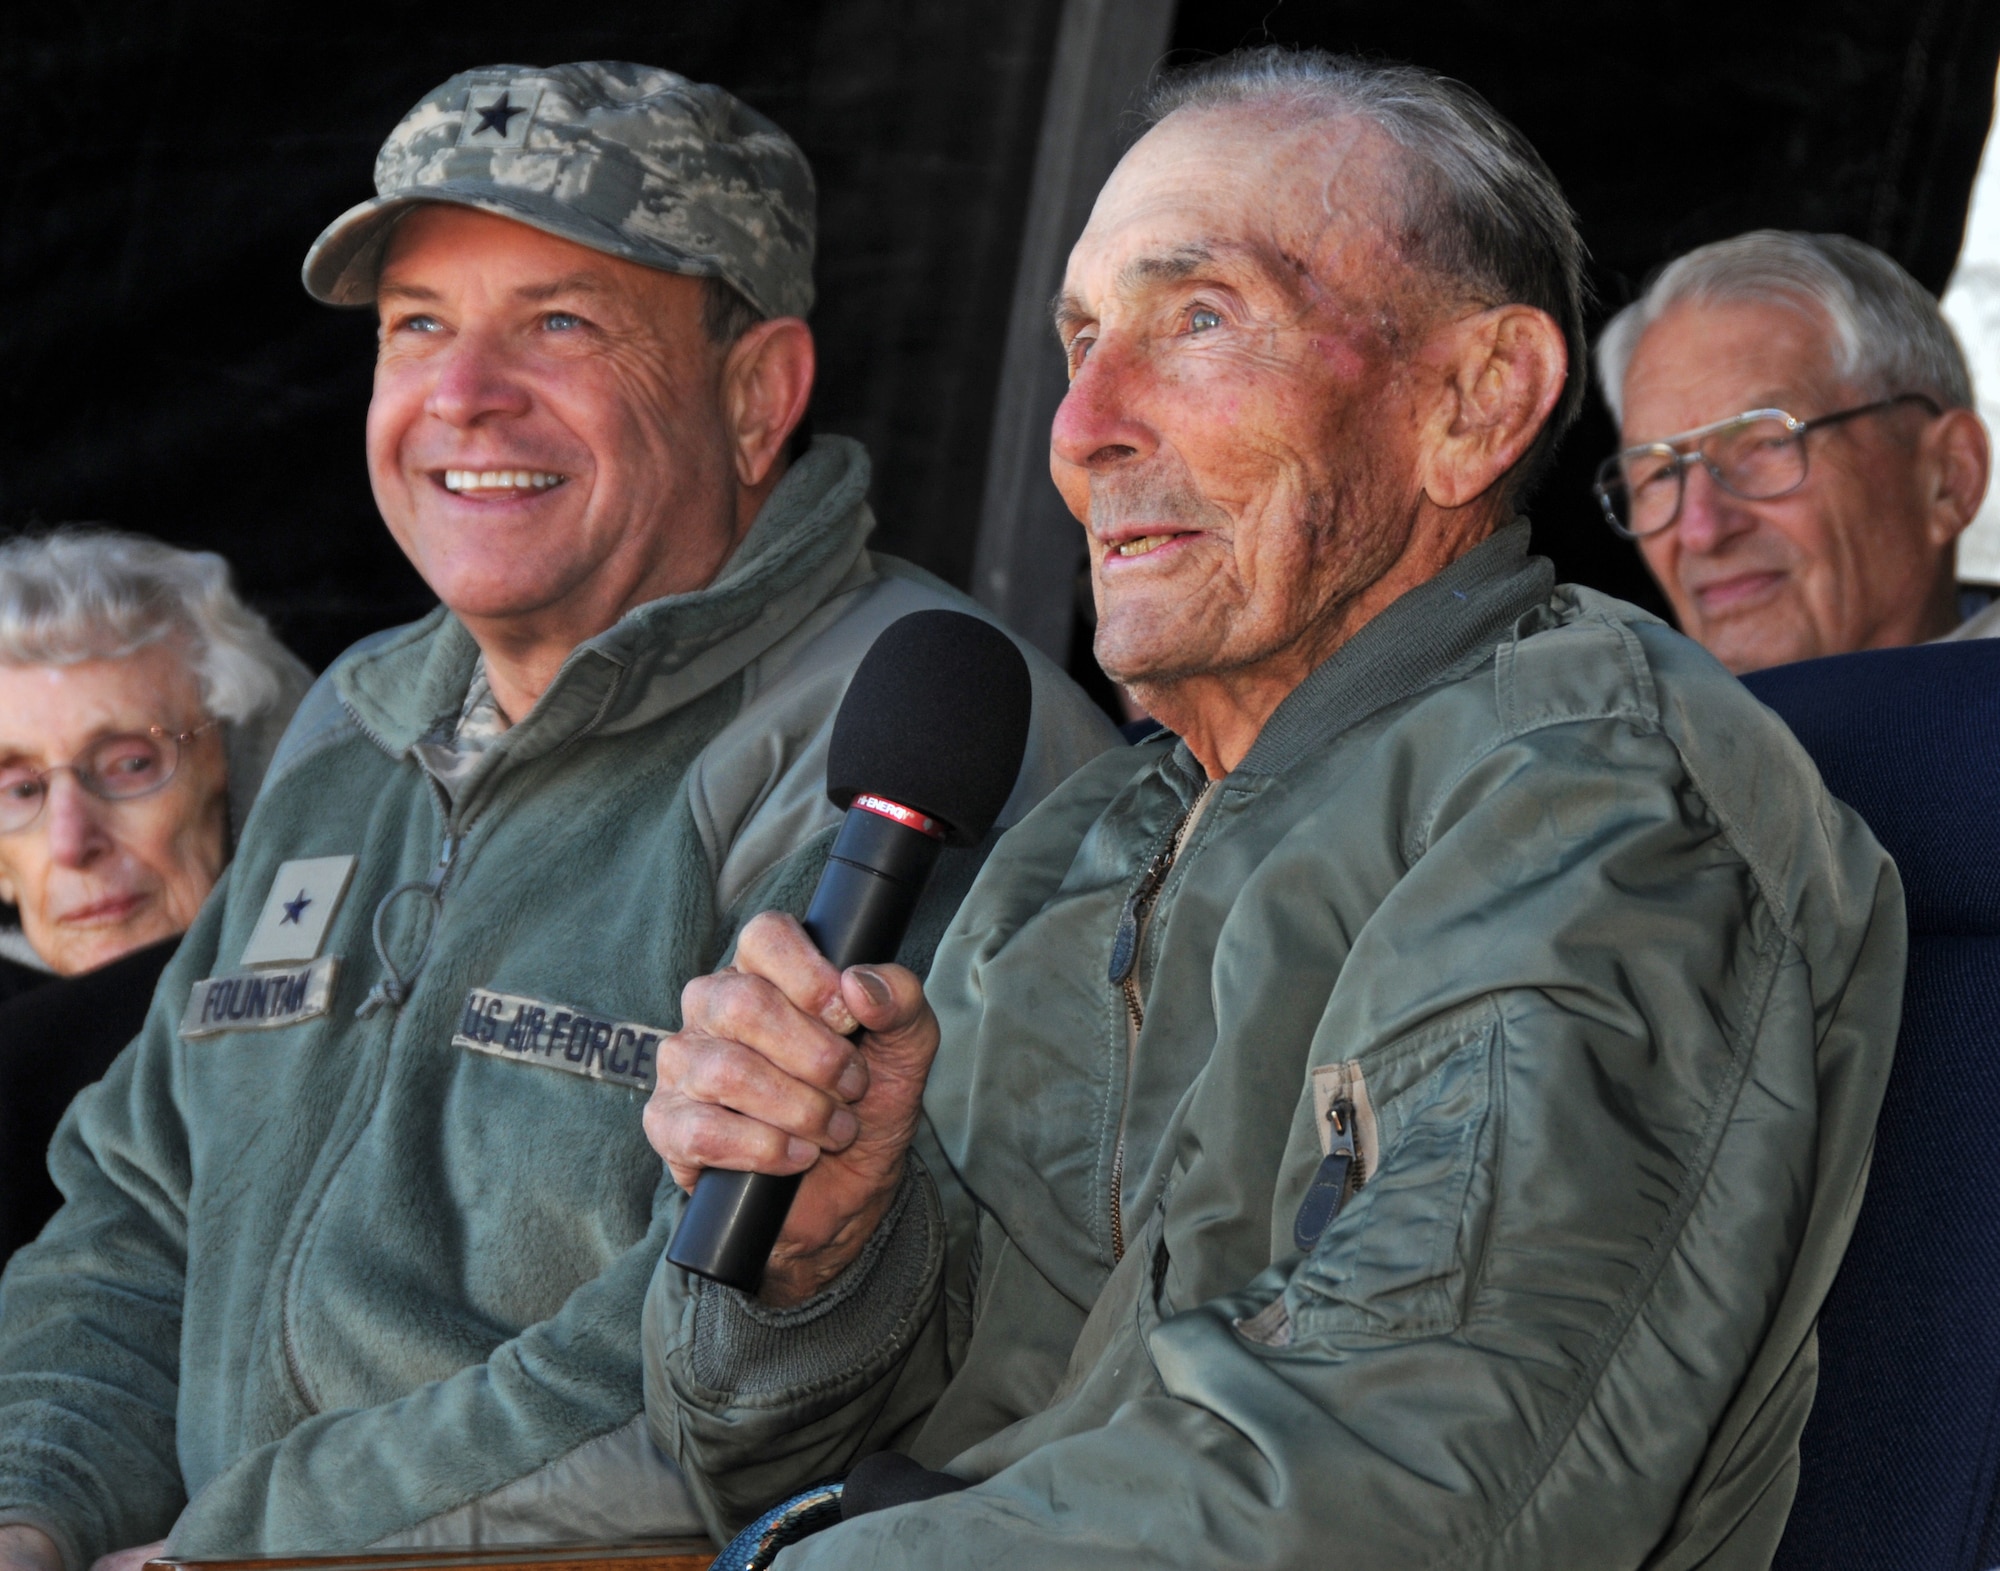 Retired Air Force Brig. Gen. Roland R. Wright addresses a group of community and military guests at a ceremony to rename the Utah Air National Guard Base in his honor held in Salt Lake City, Utah on Nov. 18, 2014. Wright, a combat pilot with a distinguished military career spanning more than three decades served as Utah's first Chief of Staff for Air. (Air National Guard photo by Staff Sgt. Annie Edwards/RELEASED)